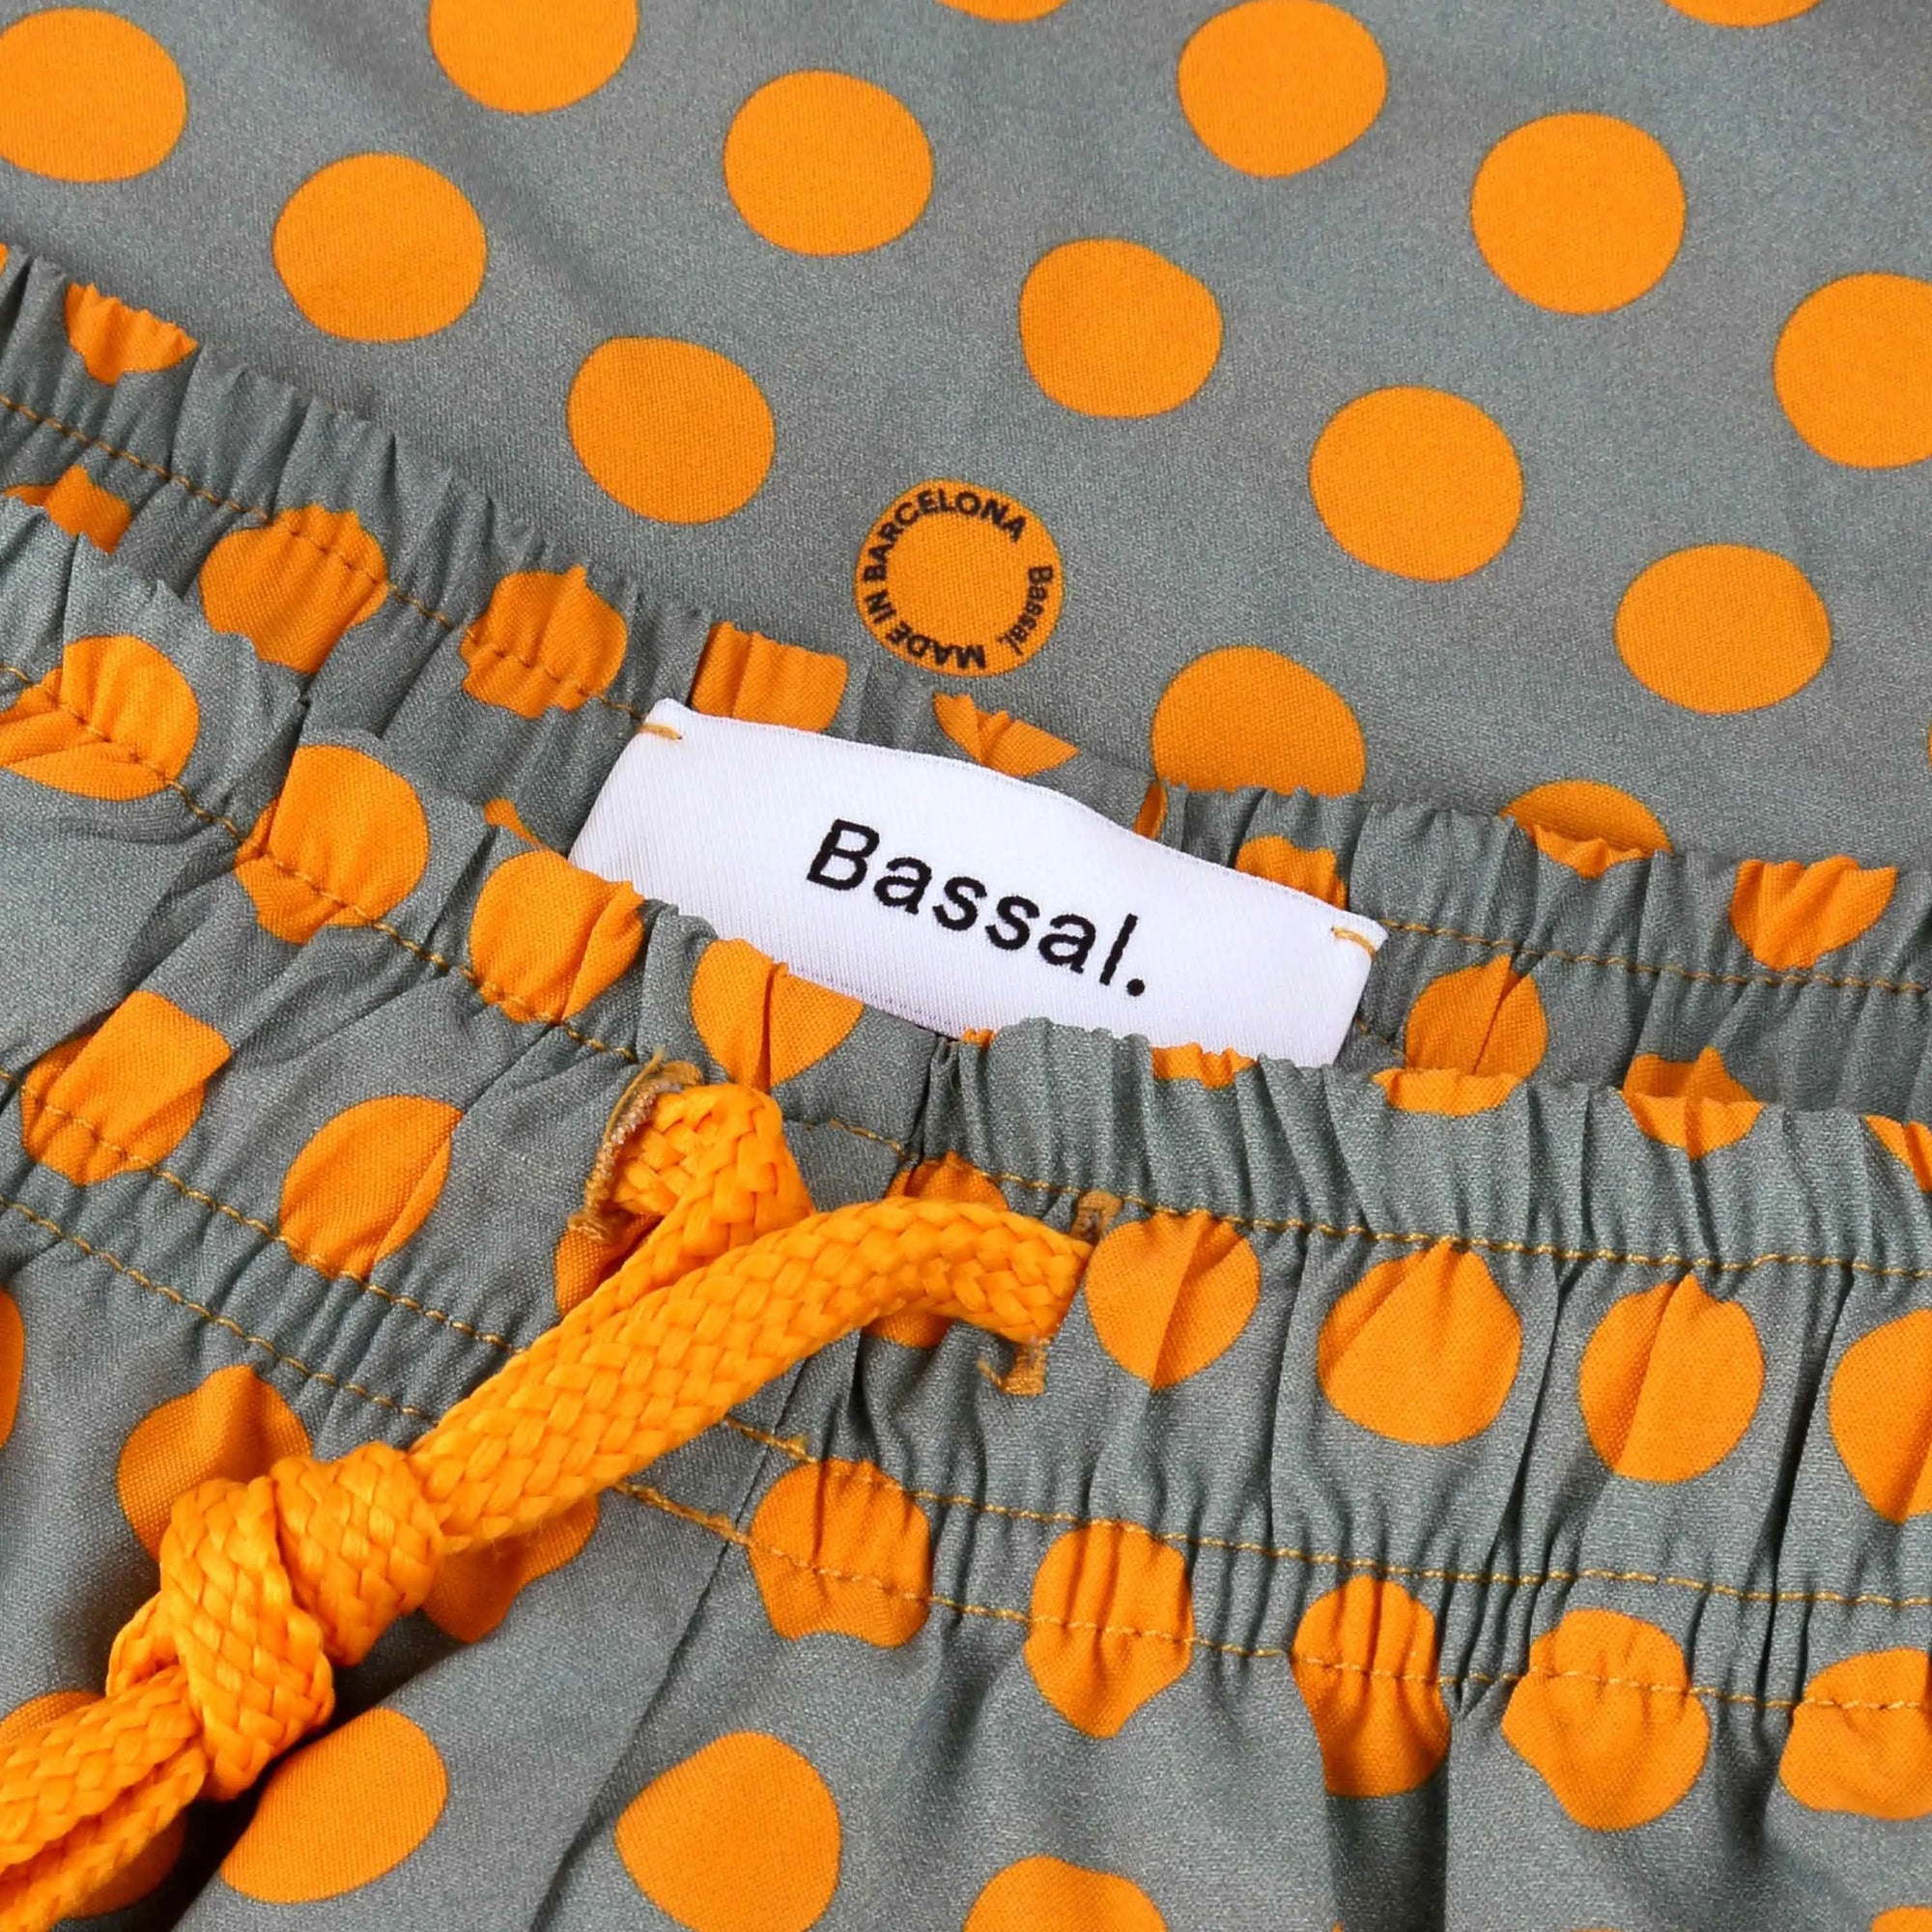 A pair of grey Dots Swimwear with orange polka dots is neatly folded in an open white box. The swimwear has an elastic waistband with a yellow drawstring. Two tags attached read "Bassal" and a note says "specifically made for you to wear." The box lid is partially visible.